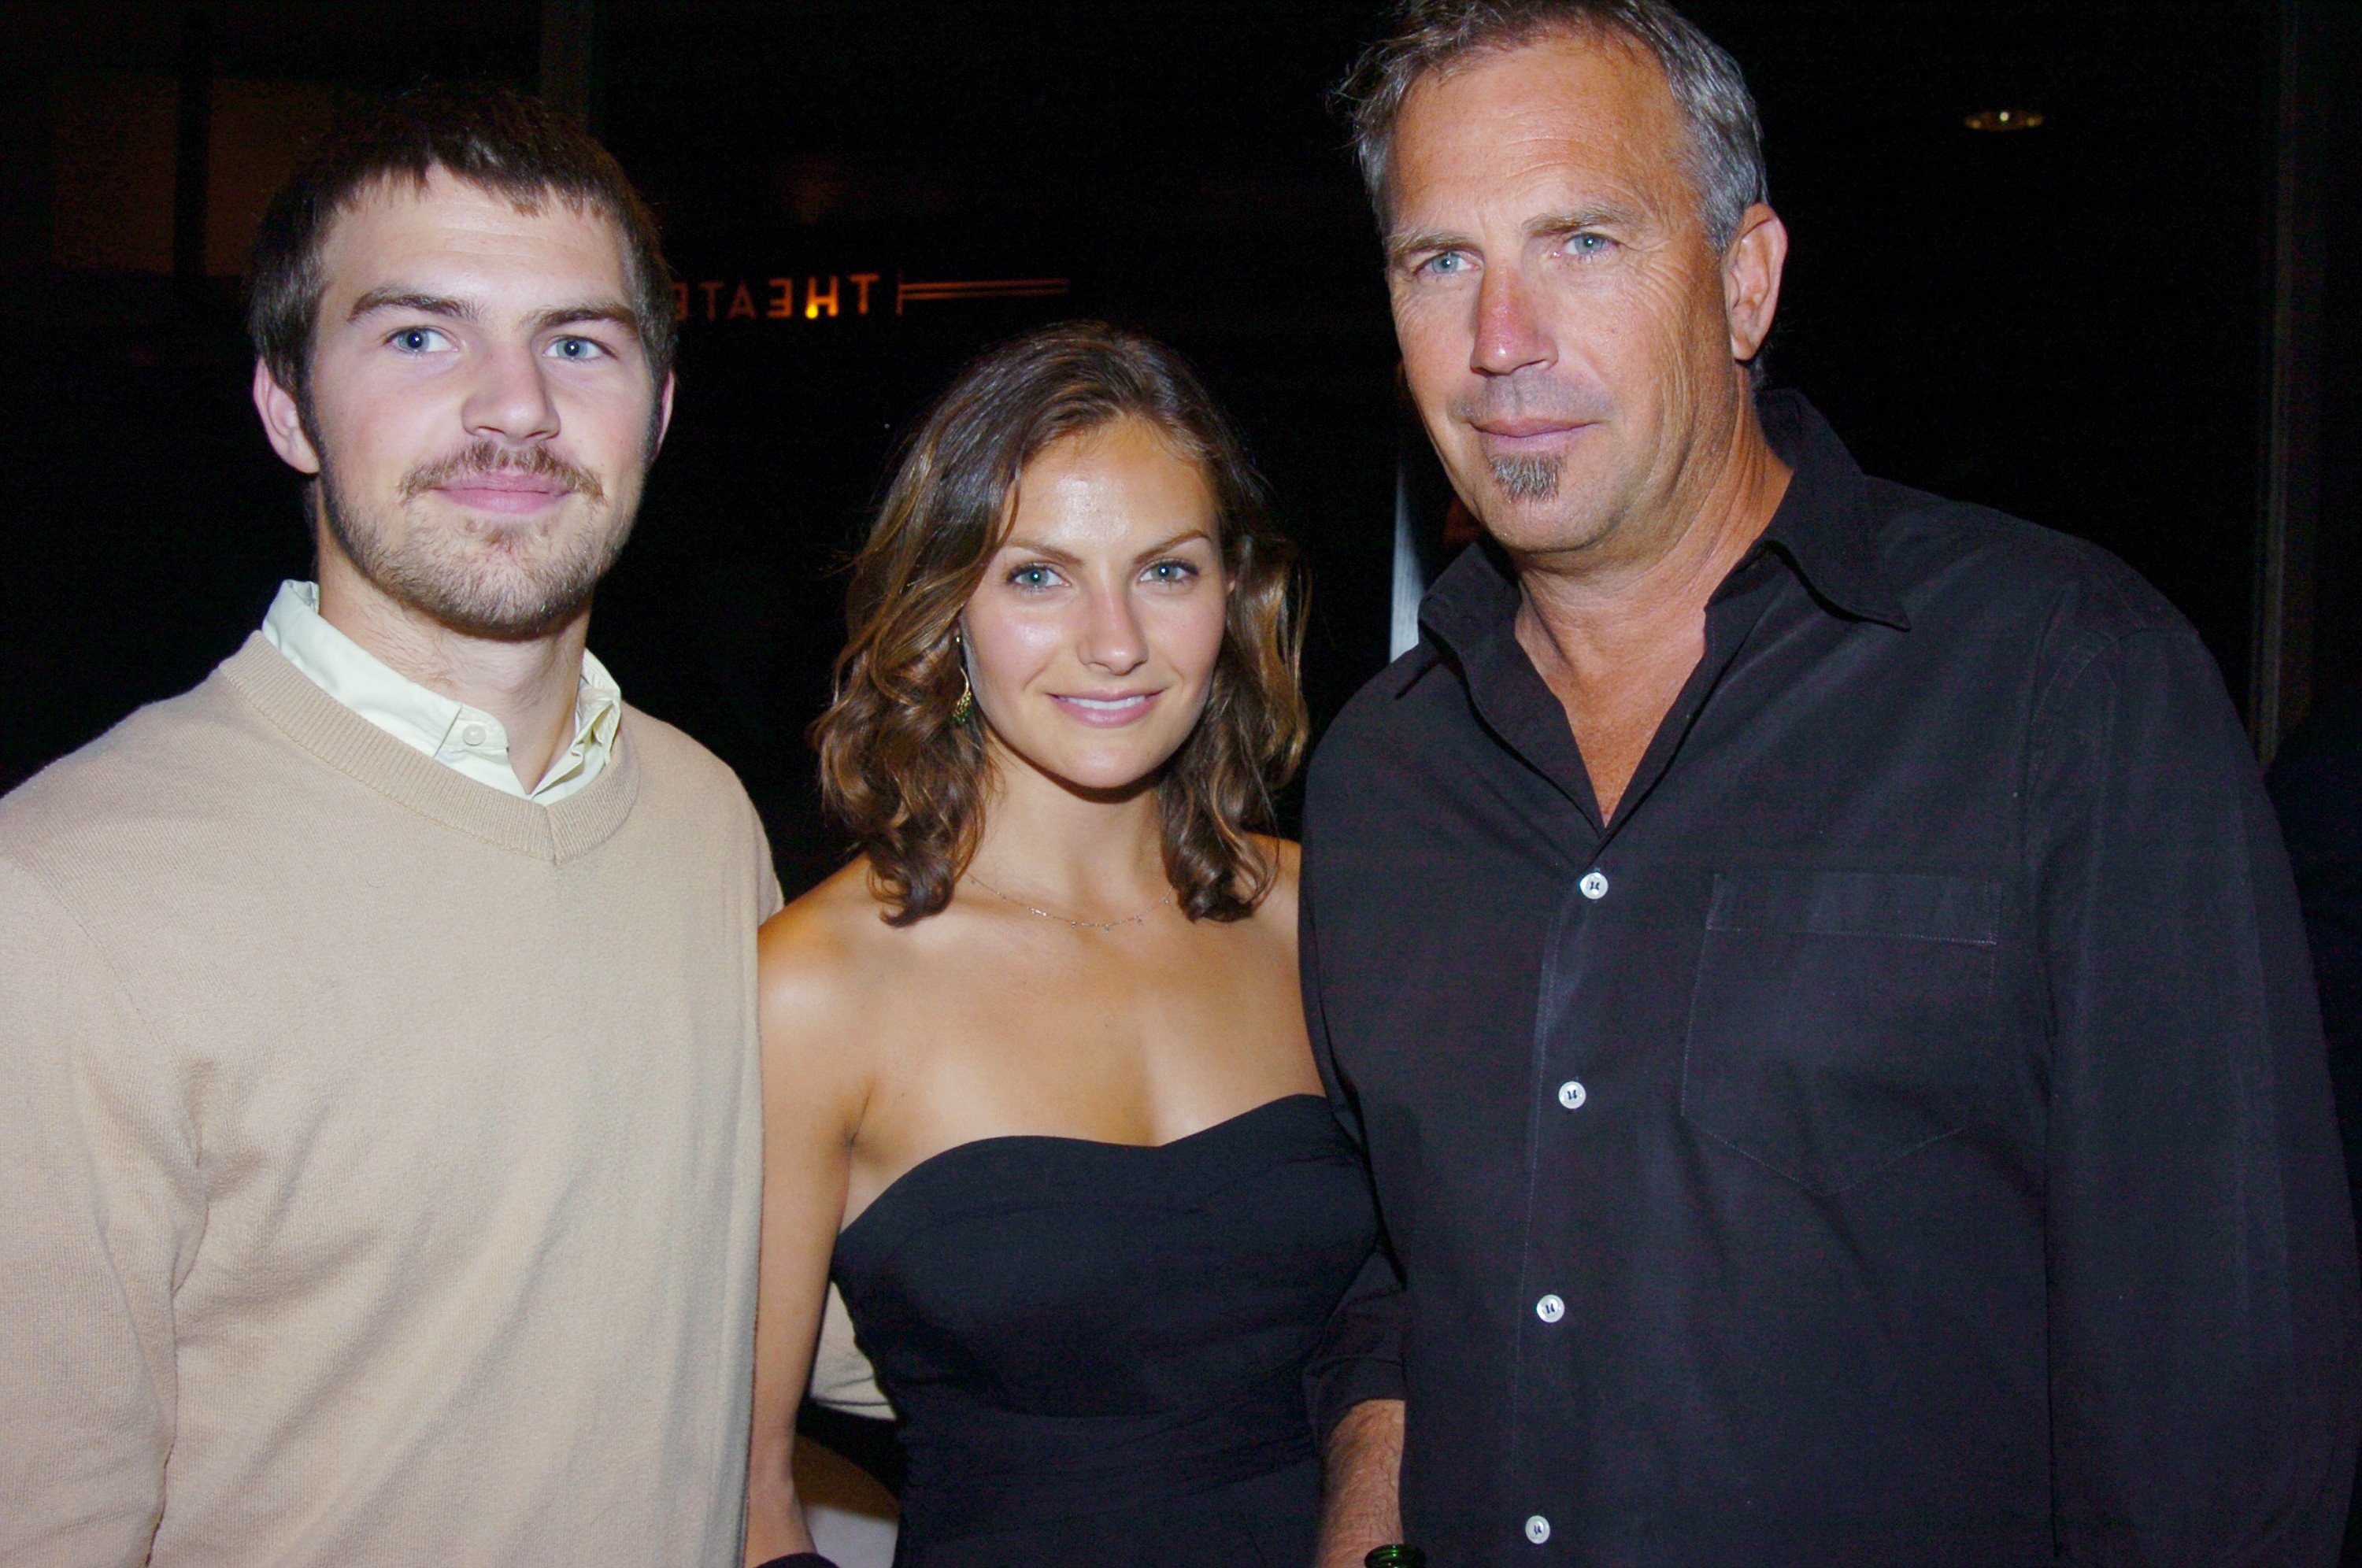 Joe, Annie and Kevin Costner at the Tribeca Grand Hotel for a special screening of the film "Mr. Brooks" May 29, 2007. |  Source: Getty Images